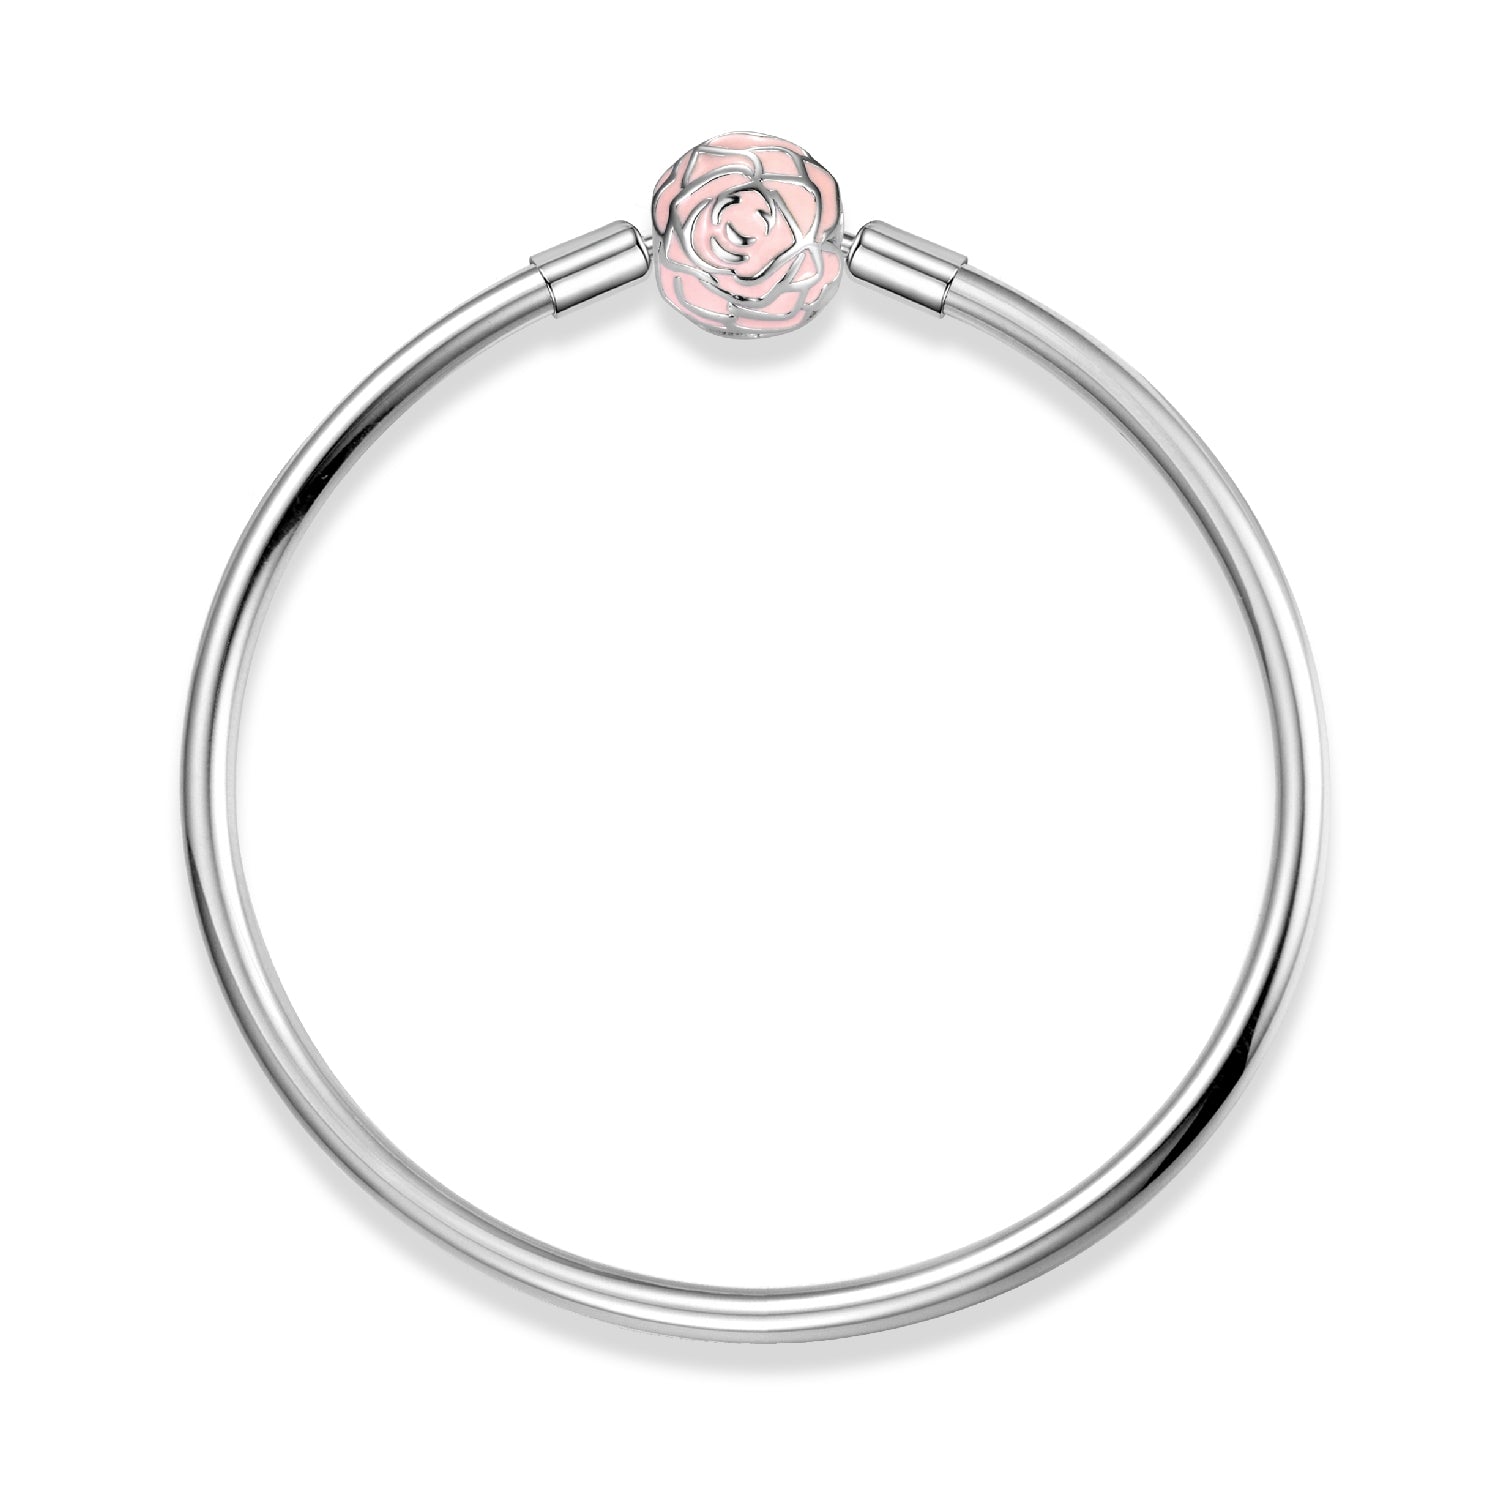 Bangle with rose clasp